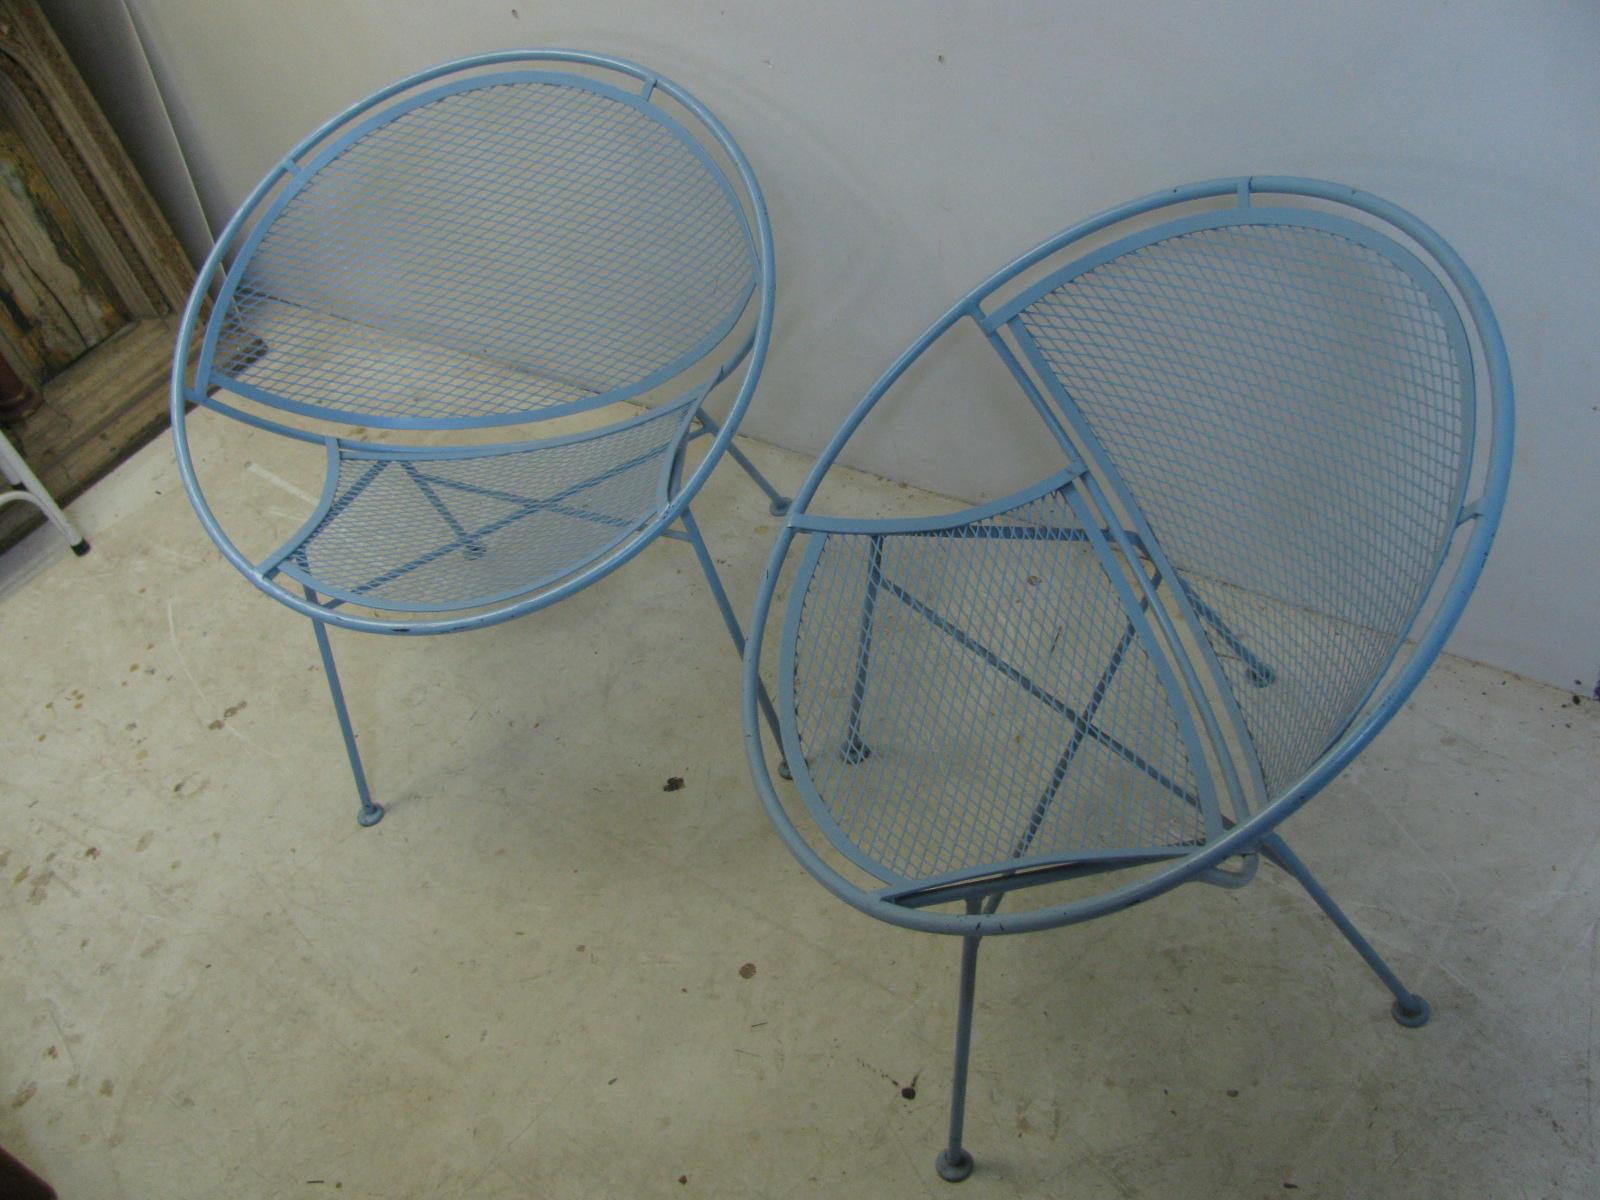 Iconic pair of radar - hoop chairs by Maurizio Tempestini for Salterini. Iron frames have been well maintained as they were kept inside during the winter months so there is no rust and no paint buildup, chairs were restored a few years ago. Color is